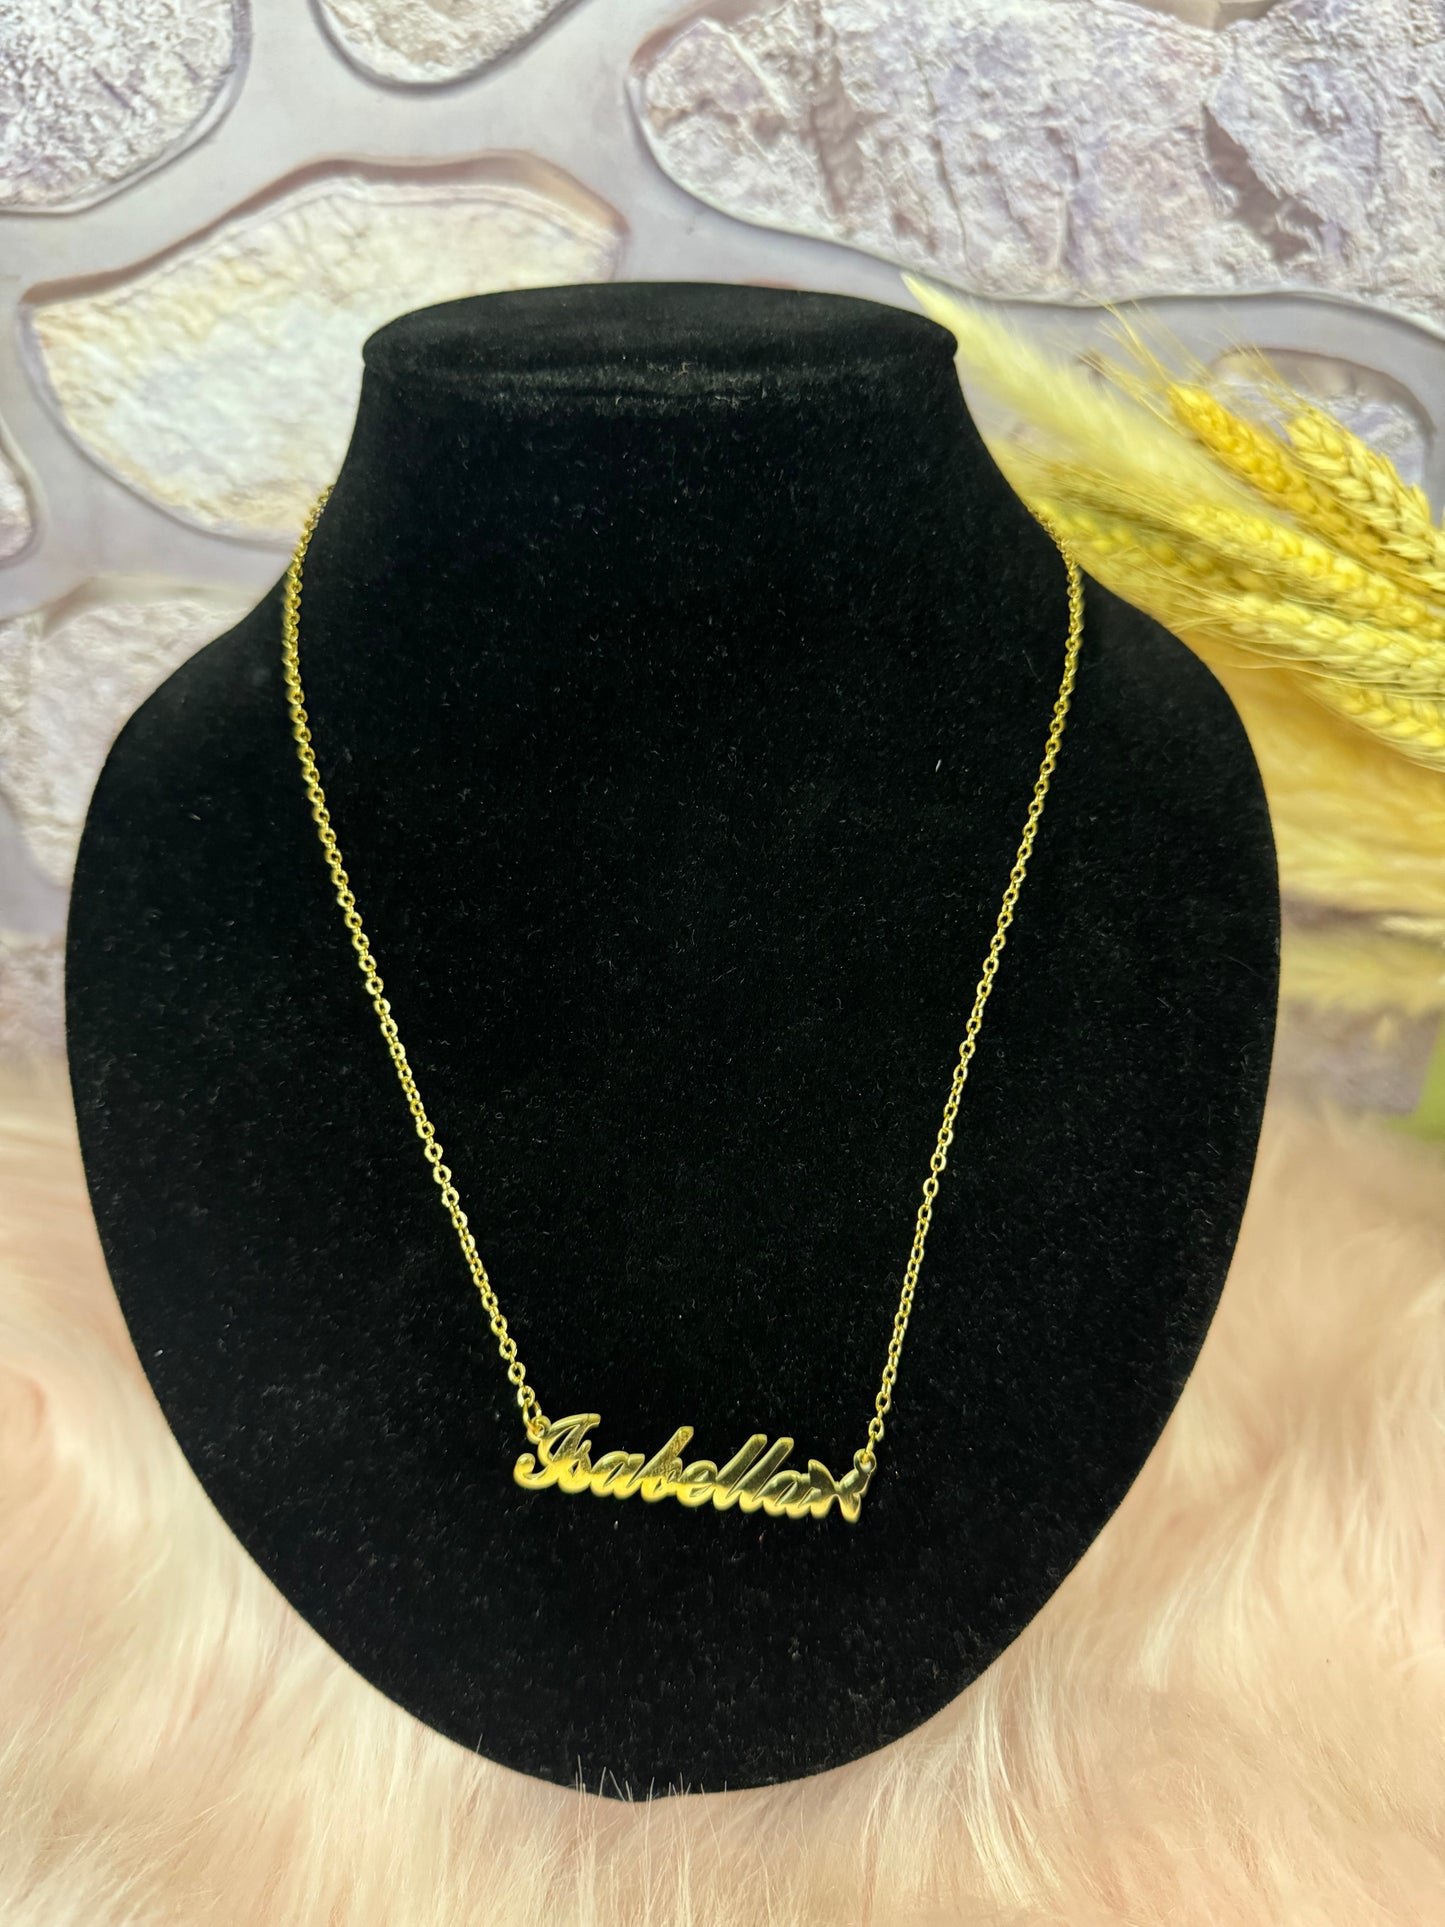 Isabella  instock name necklace - stainless steel gold plated